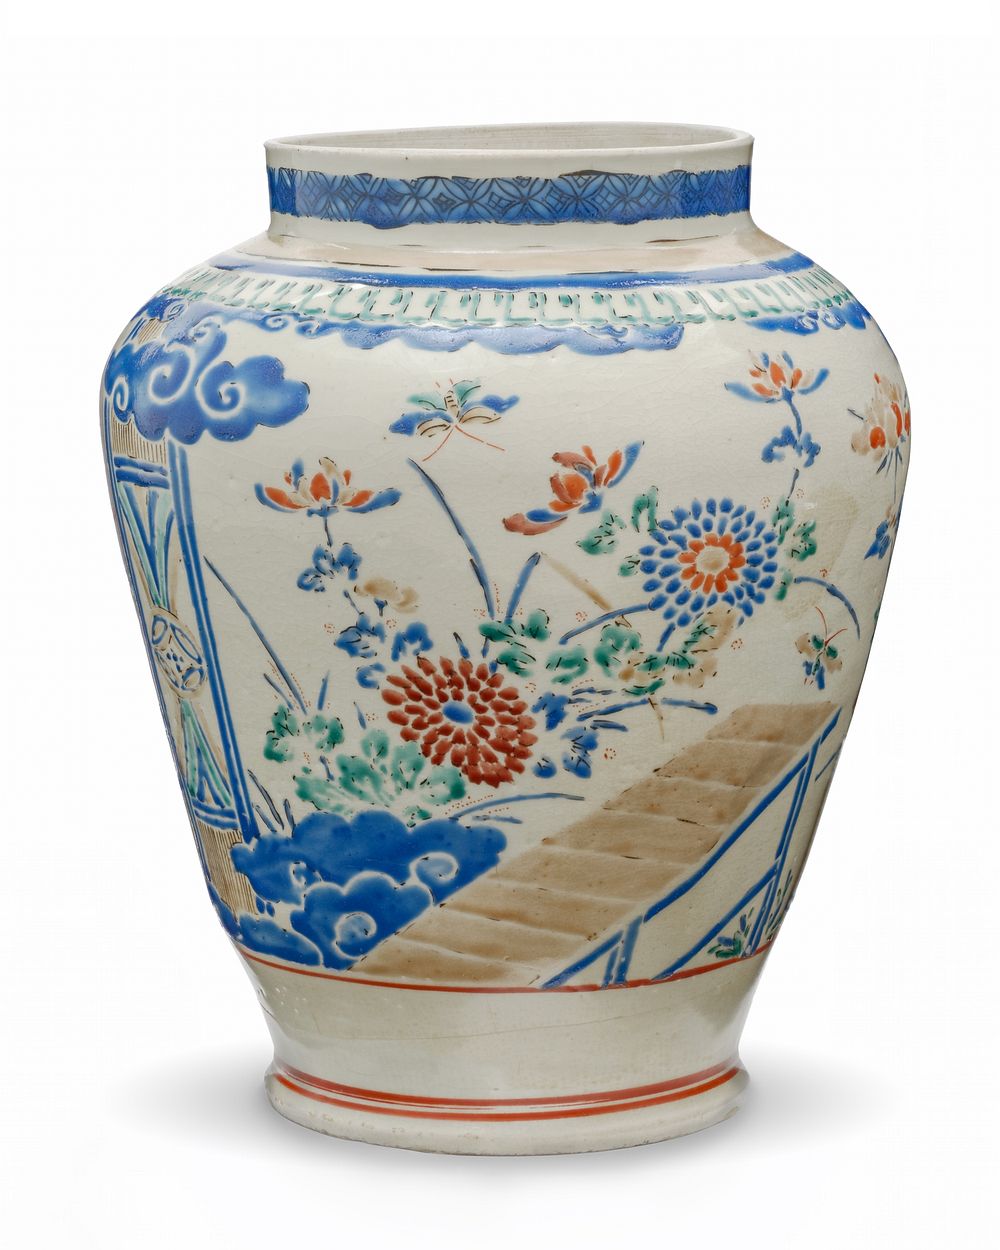 Jar with Design of a Garden by Anonymous